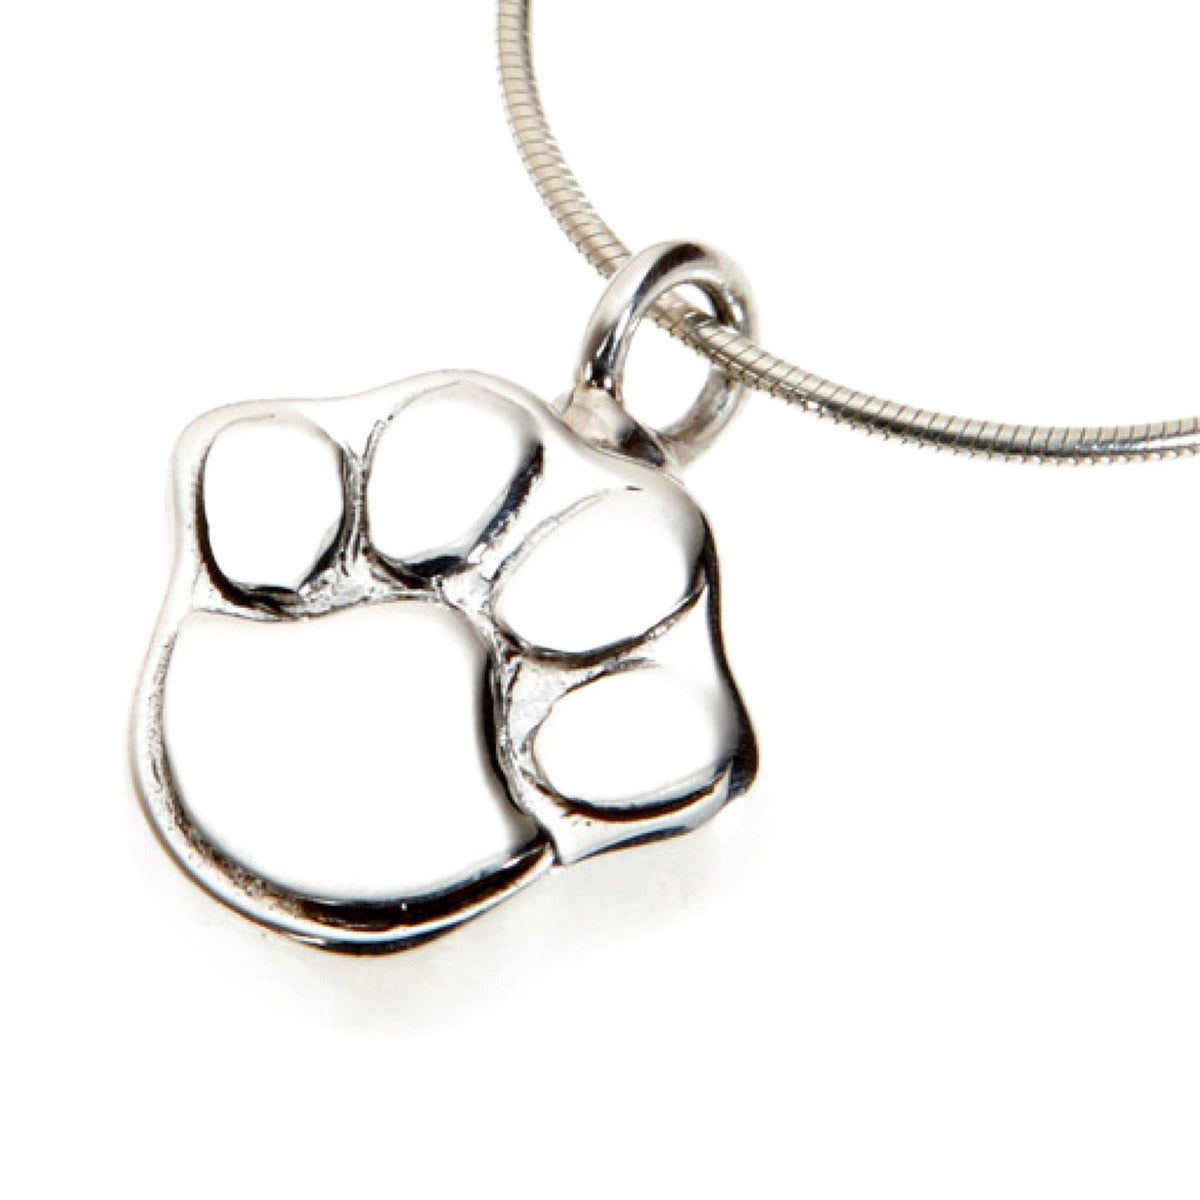 Mayfair Paw Cremation Ashes Pendant 925 Silver Urns UK